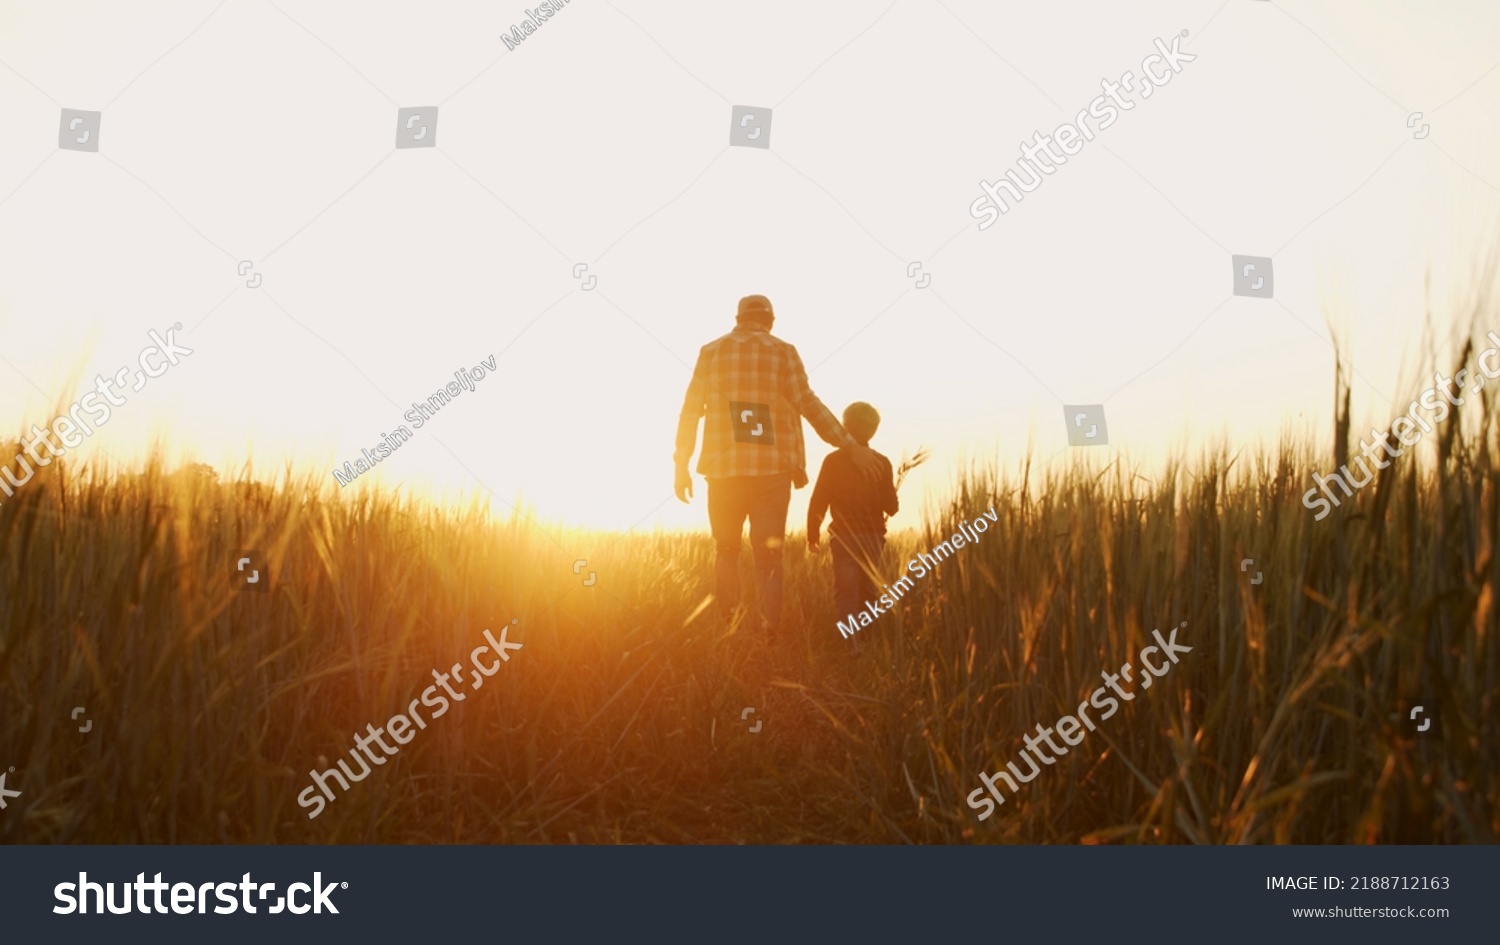 Farmer and his son in front of a sunset agricultural landscape. Man and a boy in a countryside field. Fatherhood, country life, farming and country lifestyle. #2188712163